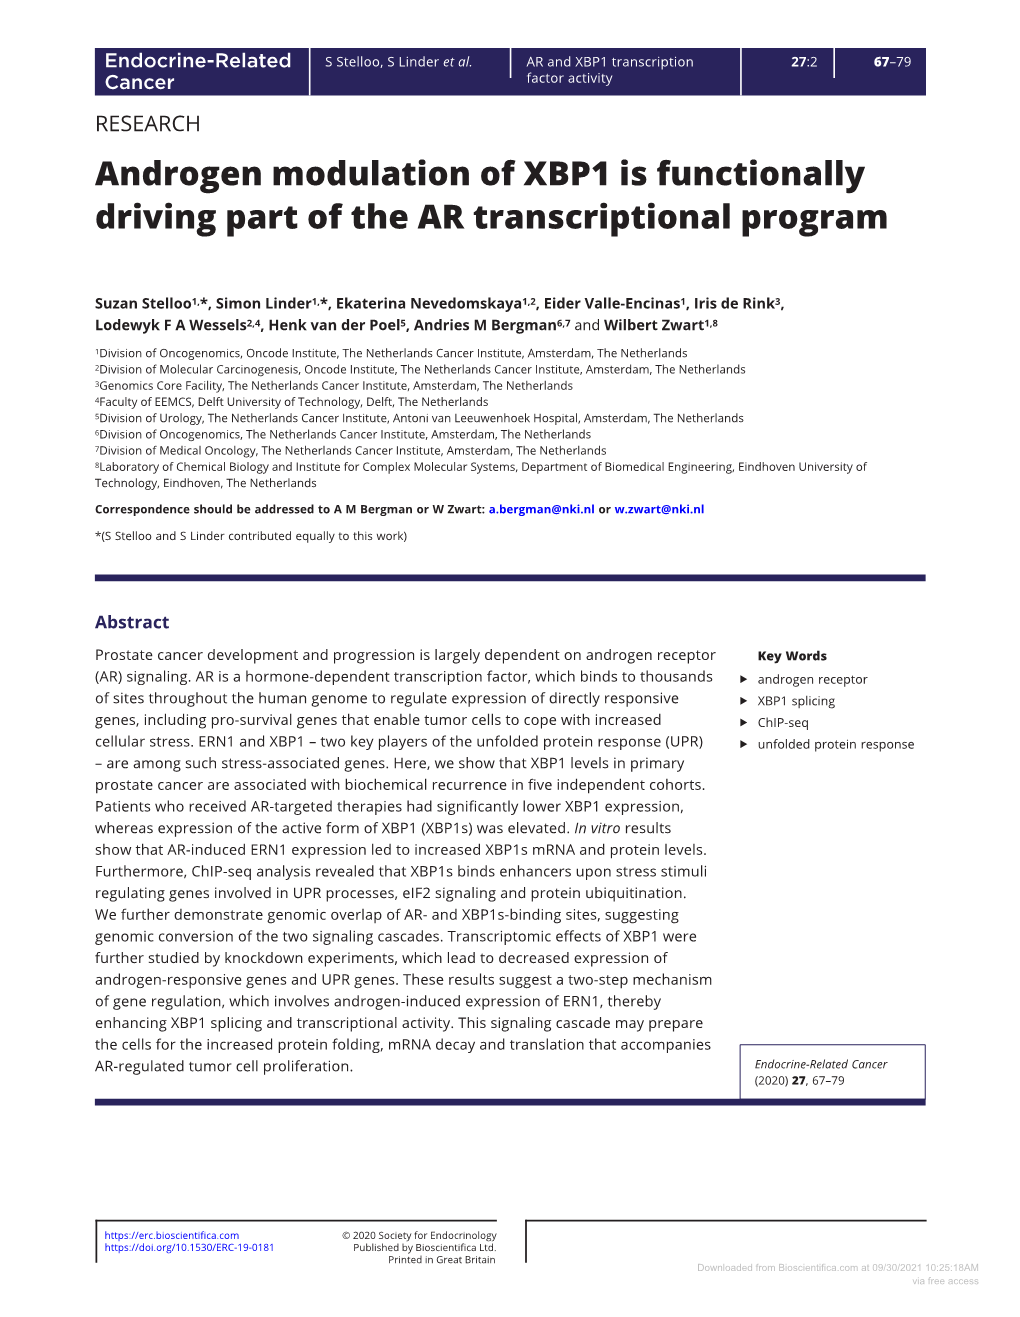 Androgen Modulation of XBP1 Is Functionally Driving Part of the AR Transcriptional Program